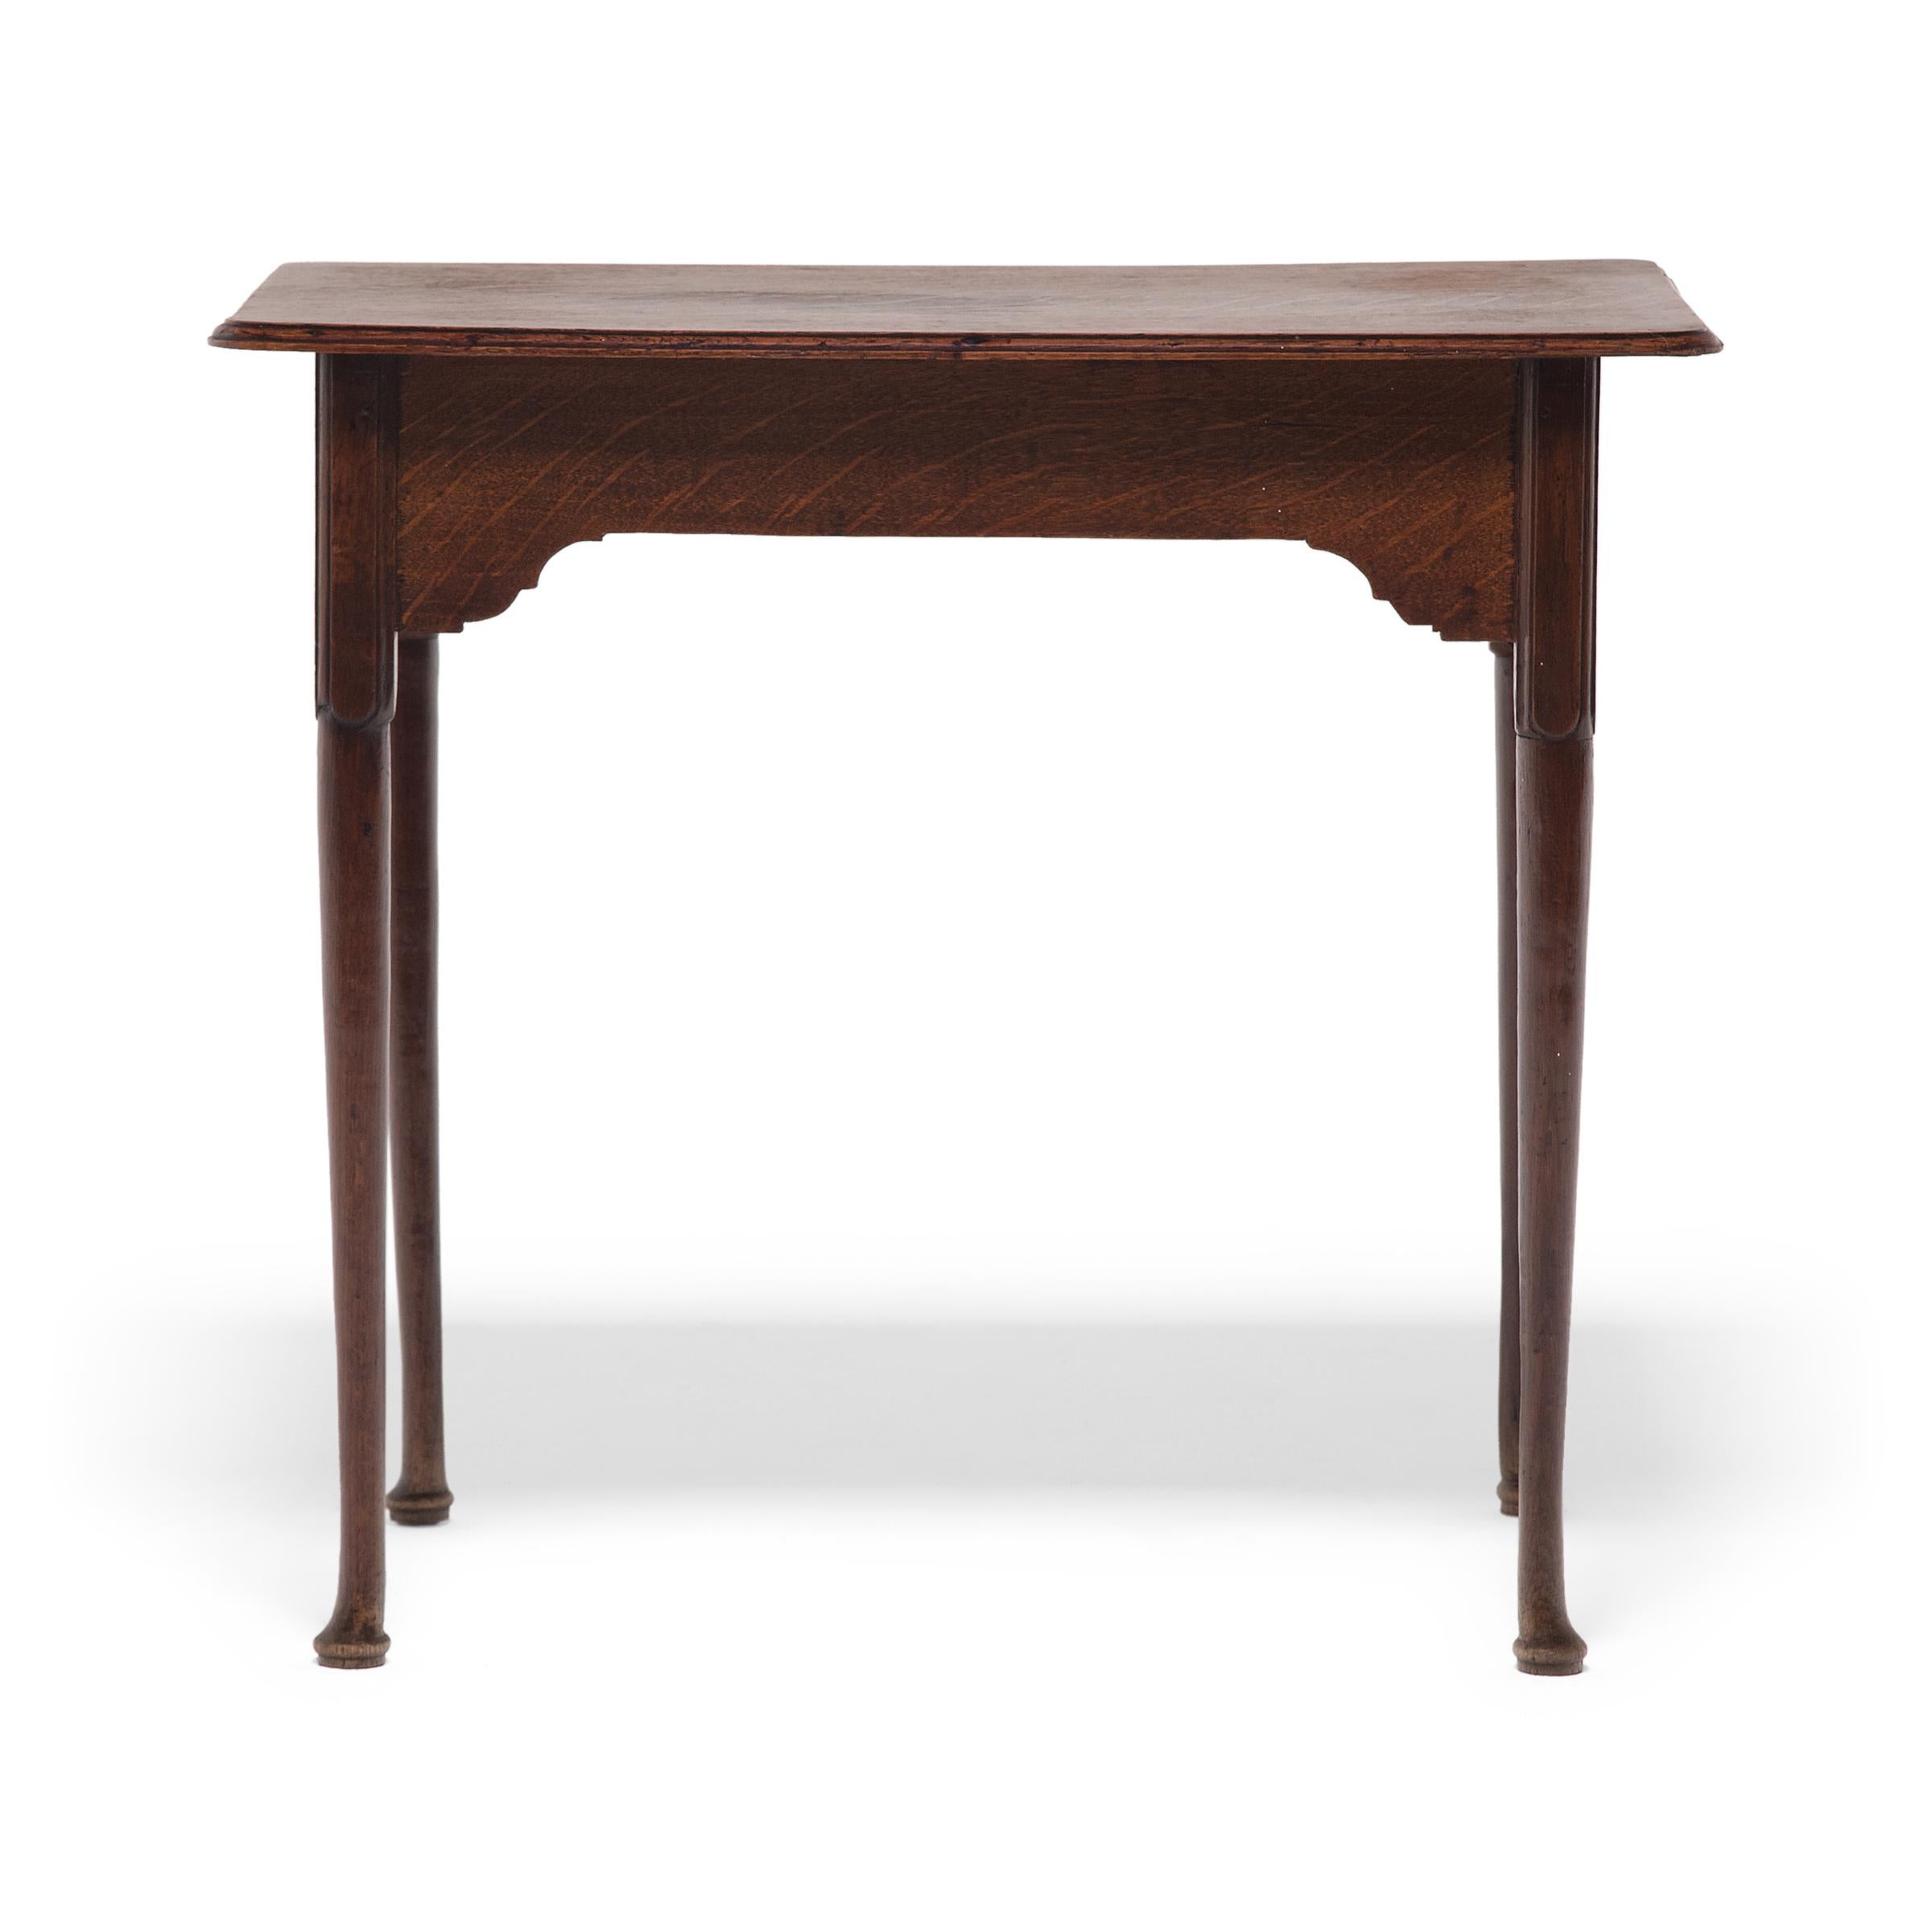 This antique English side table was crafted in the mid-19th century in the style of Queen Anne furniture. Although fairly basic, the table is beautifully crafted with a lightweight design and subtle carved detail to the legs and apron. The